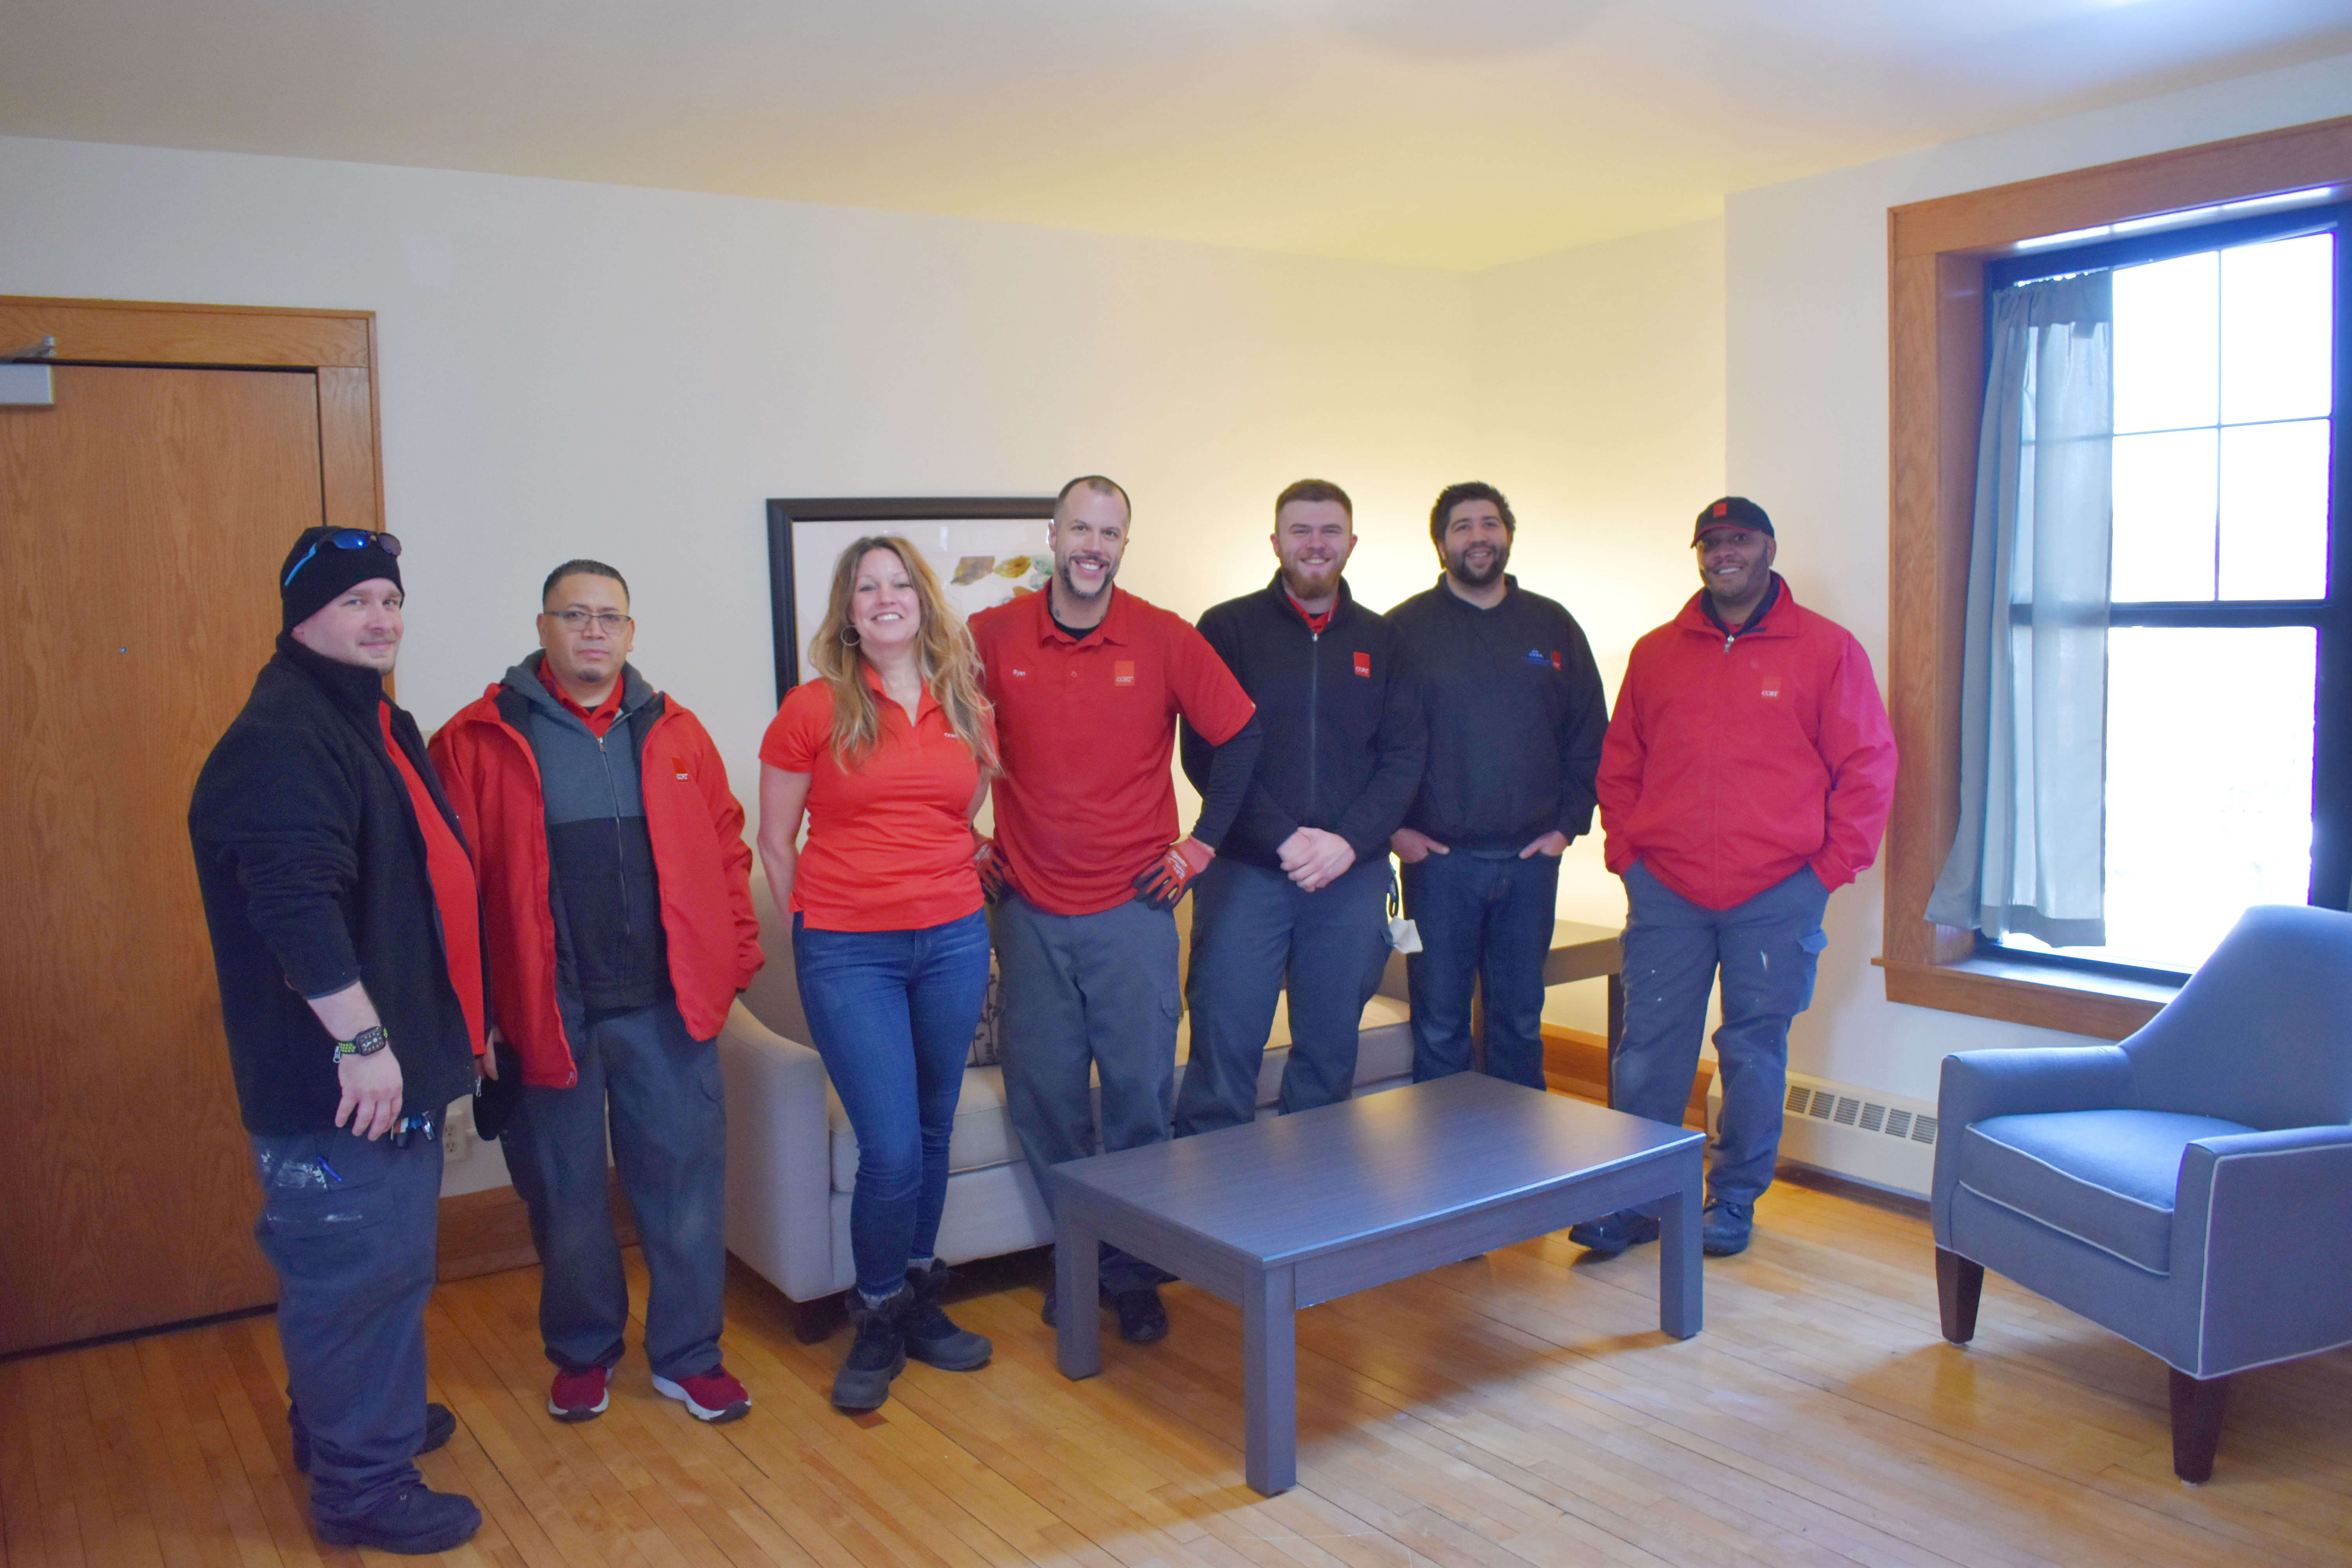 CORT furniture volunteer team standing in the living room of the apartment unit that they painted and furnished